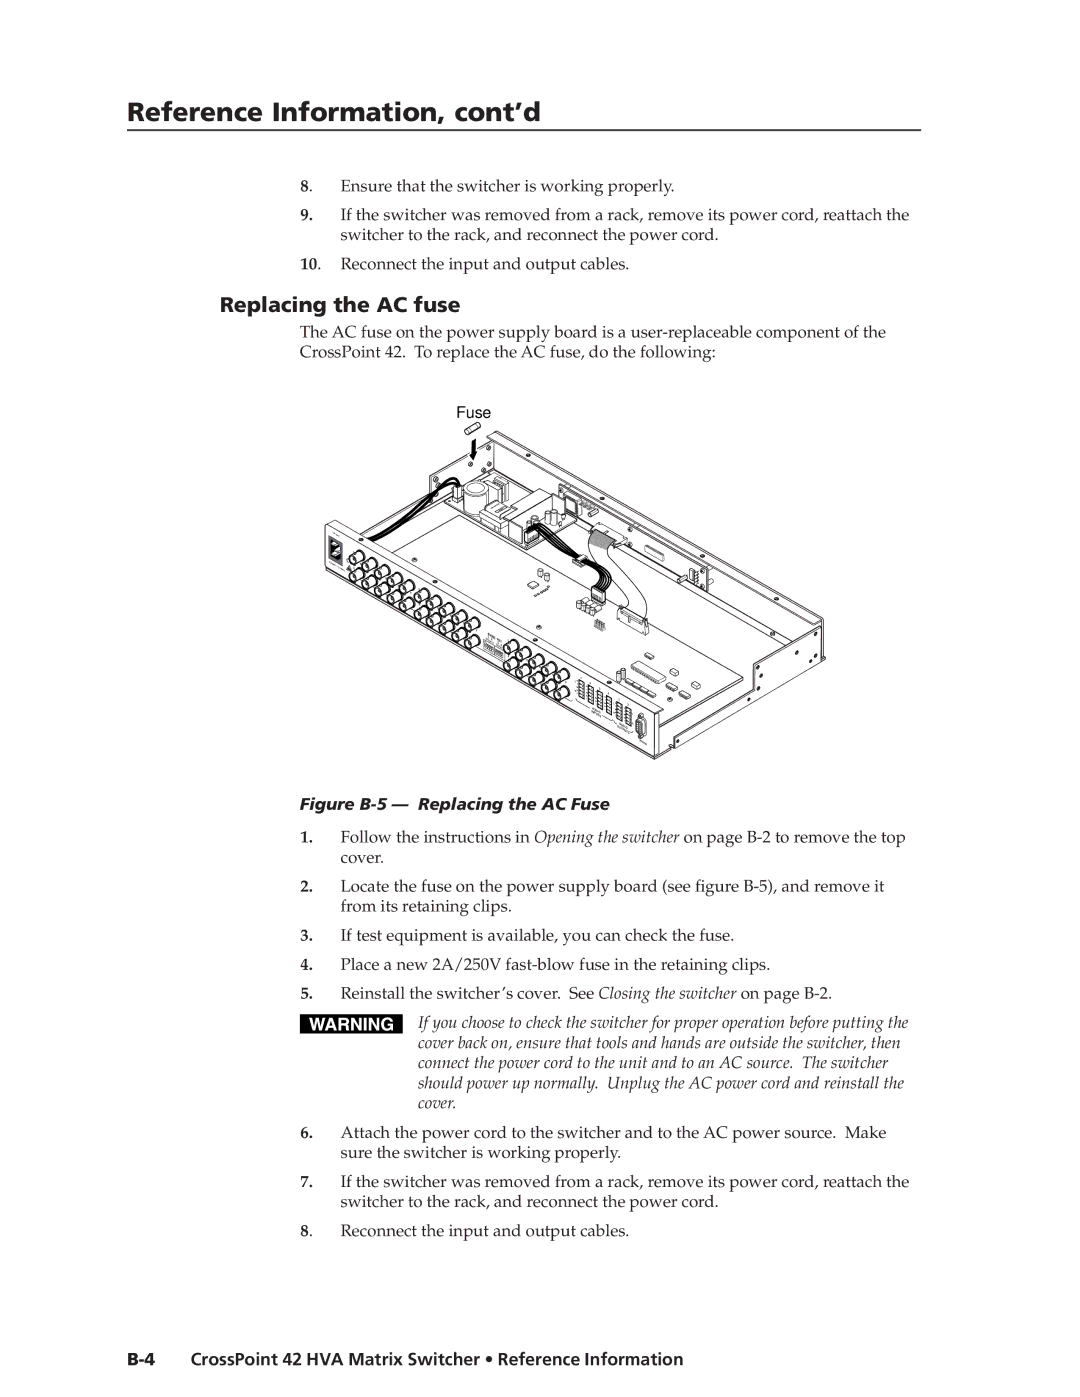 Extron electronic 42 HVA manual Reference Information, cont’d, Replacing the AC fuse, Reconnect the input and output cables 